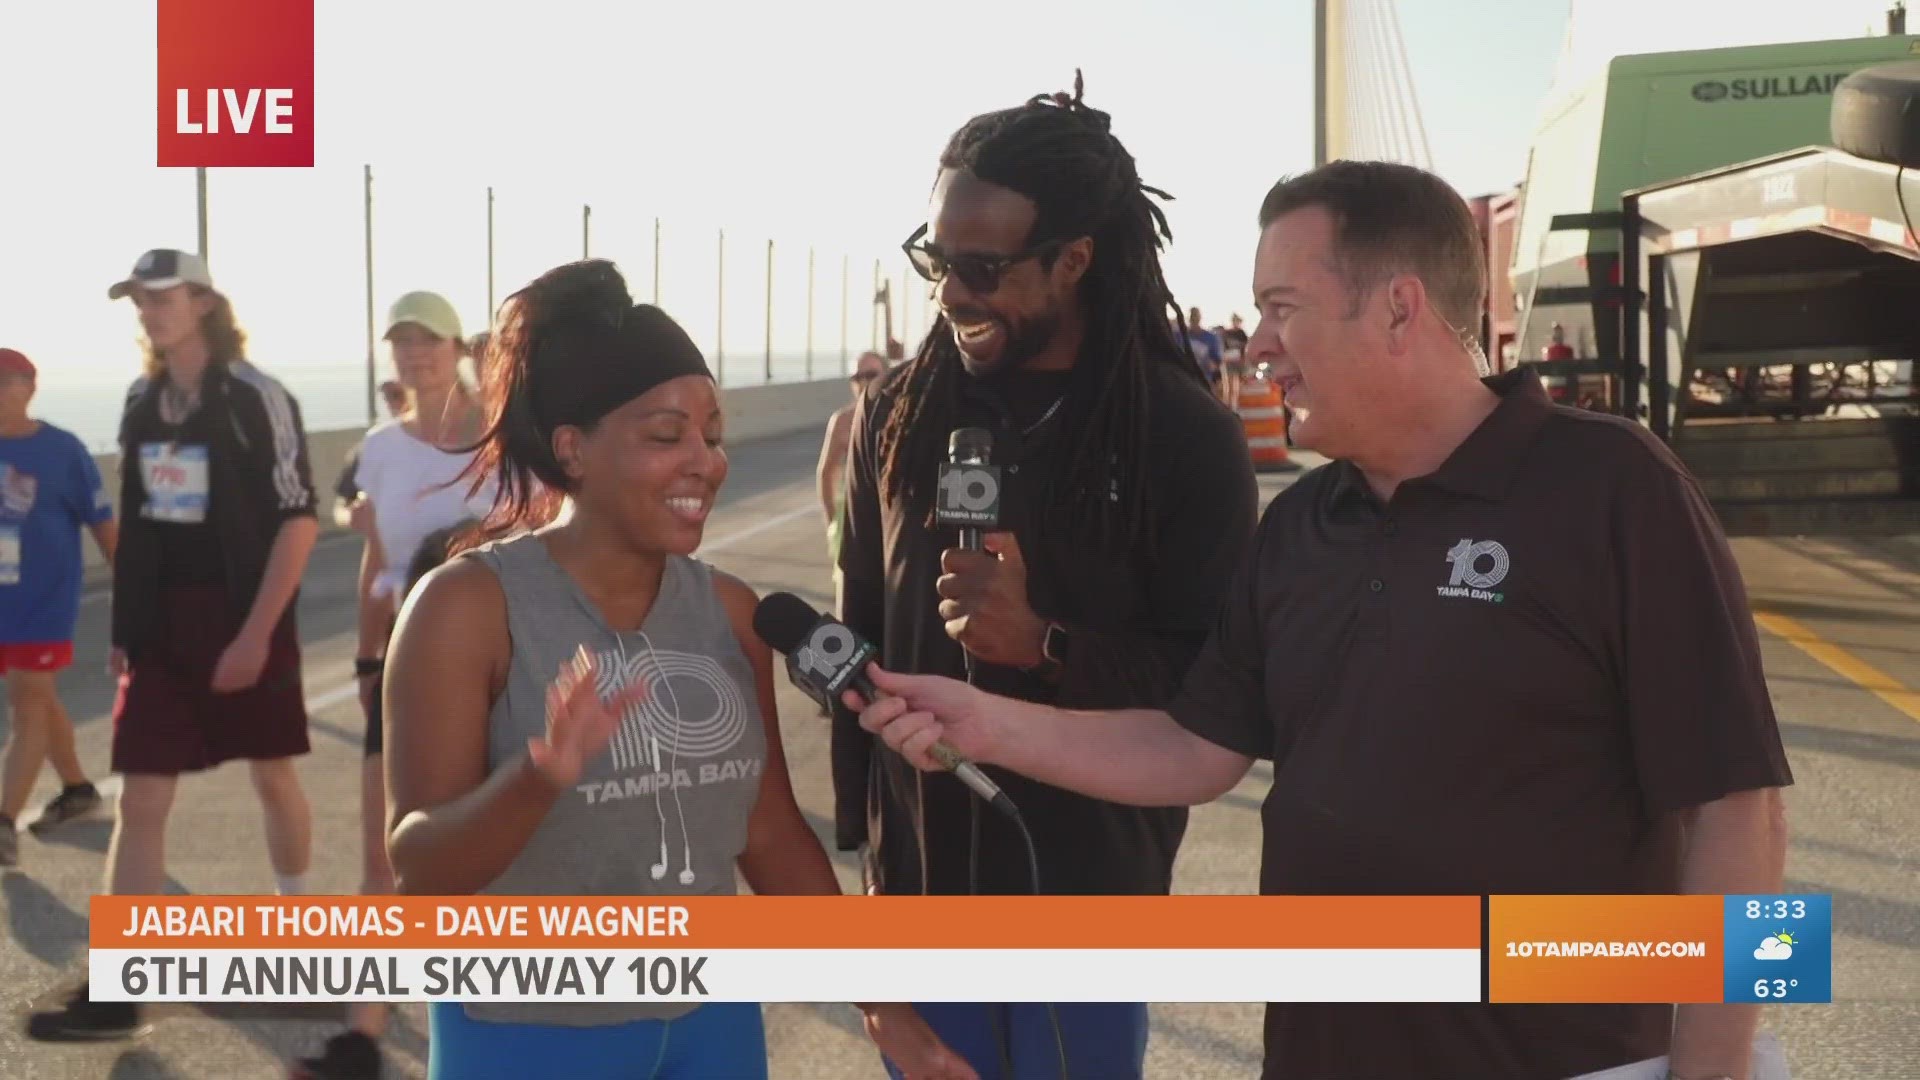 Once Skyway 10K participants hit the top of the Sunshine Skyway Bridge, it's all downhill from there — and that's a good thing.